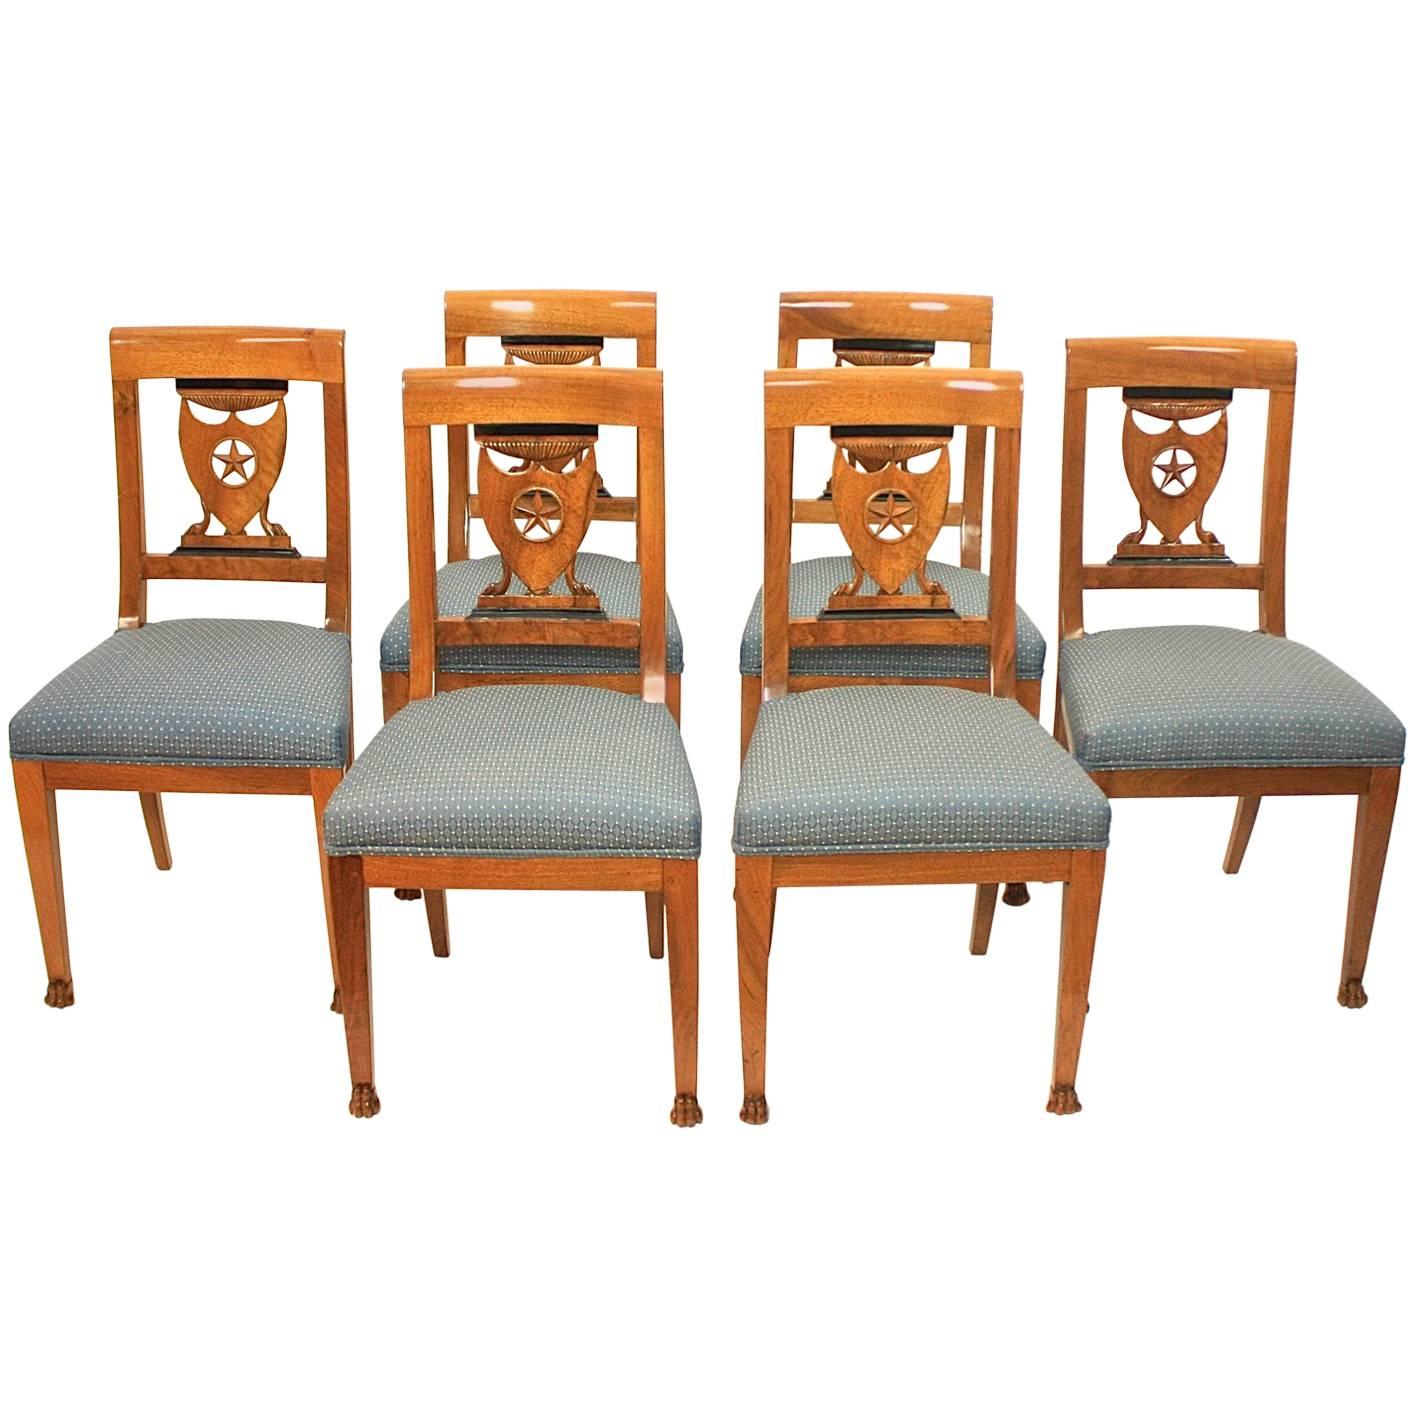 Set of Six Late 18th Century Directoire Dining Chairs, workshop of P.M. Balny